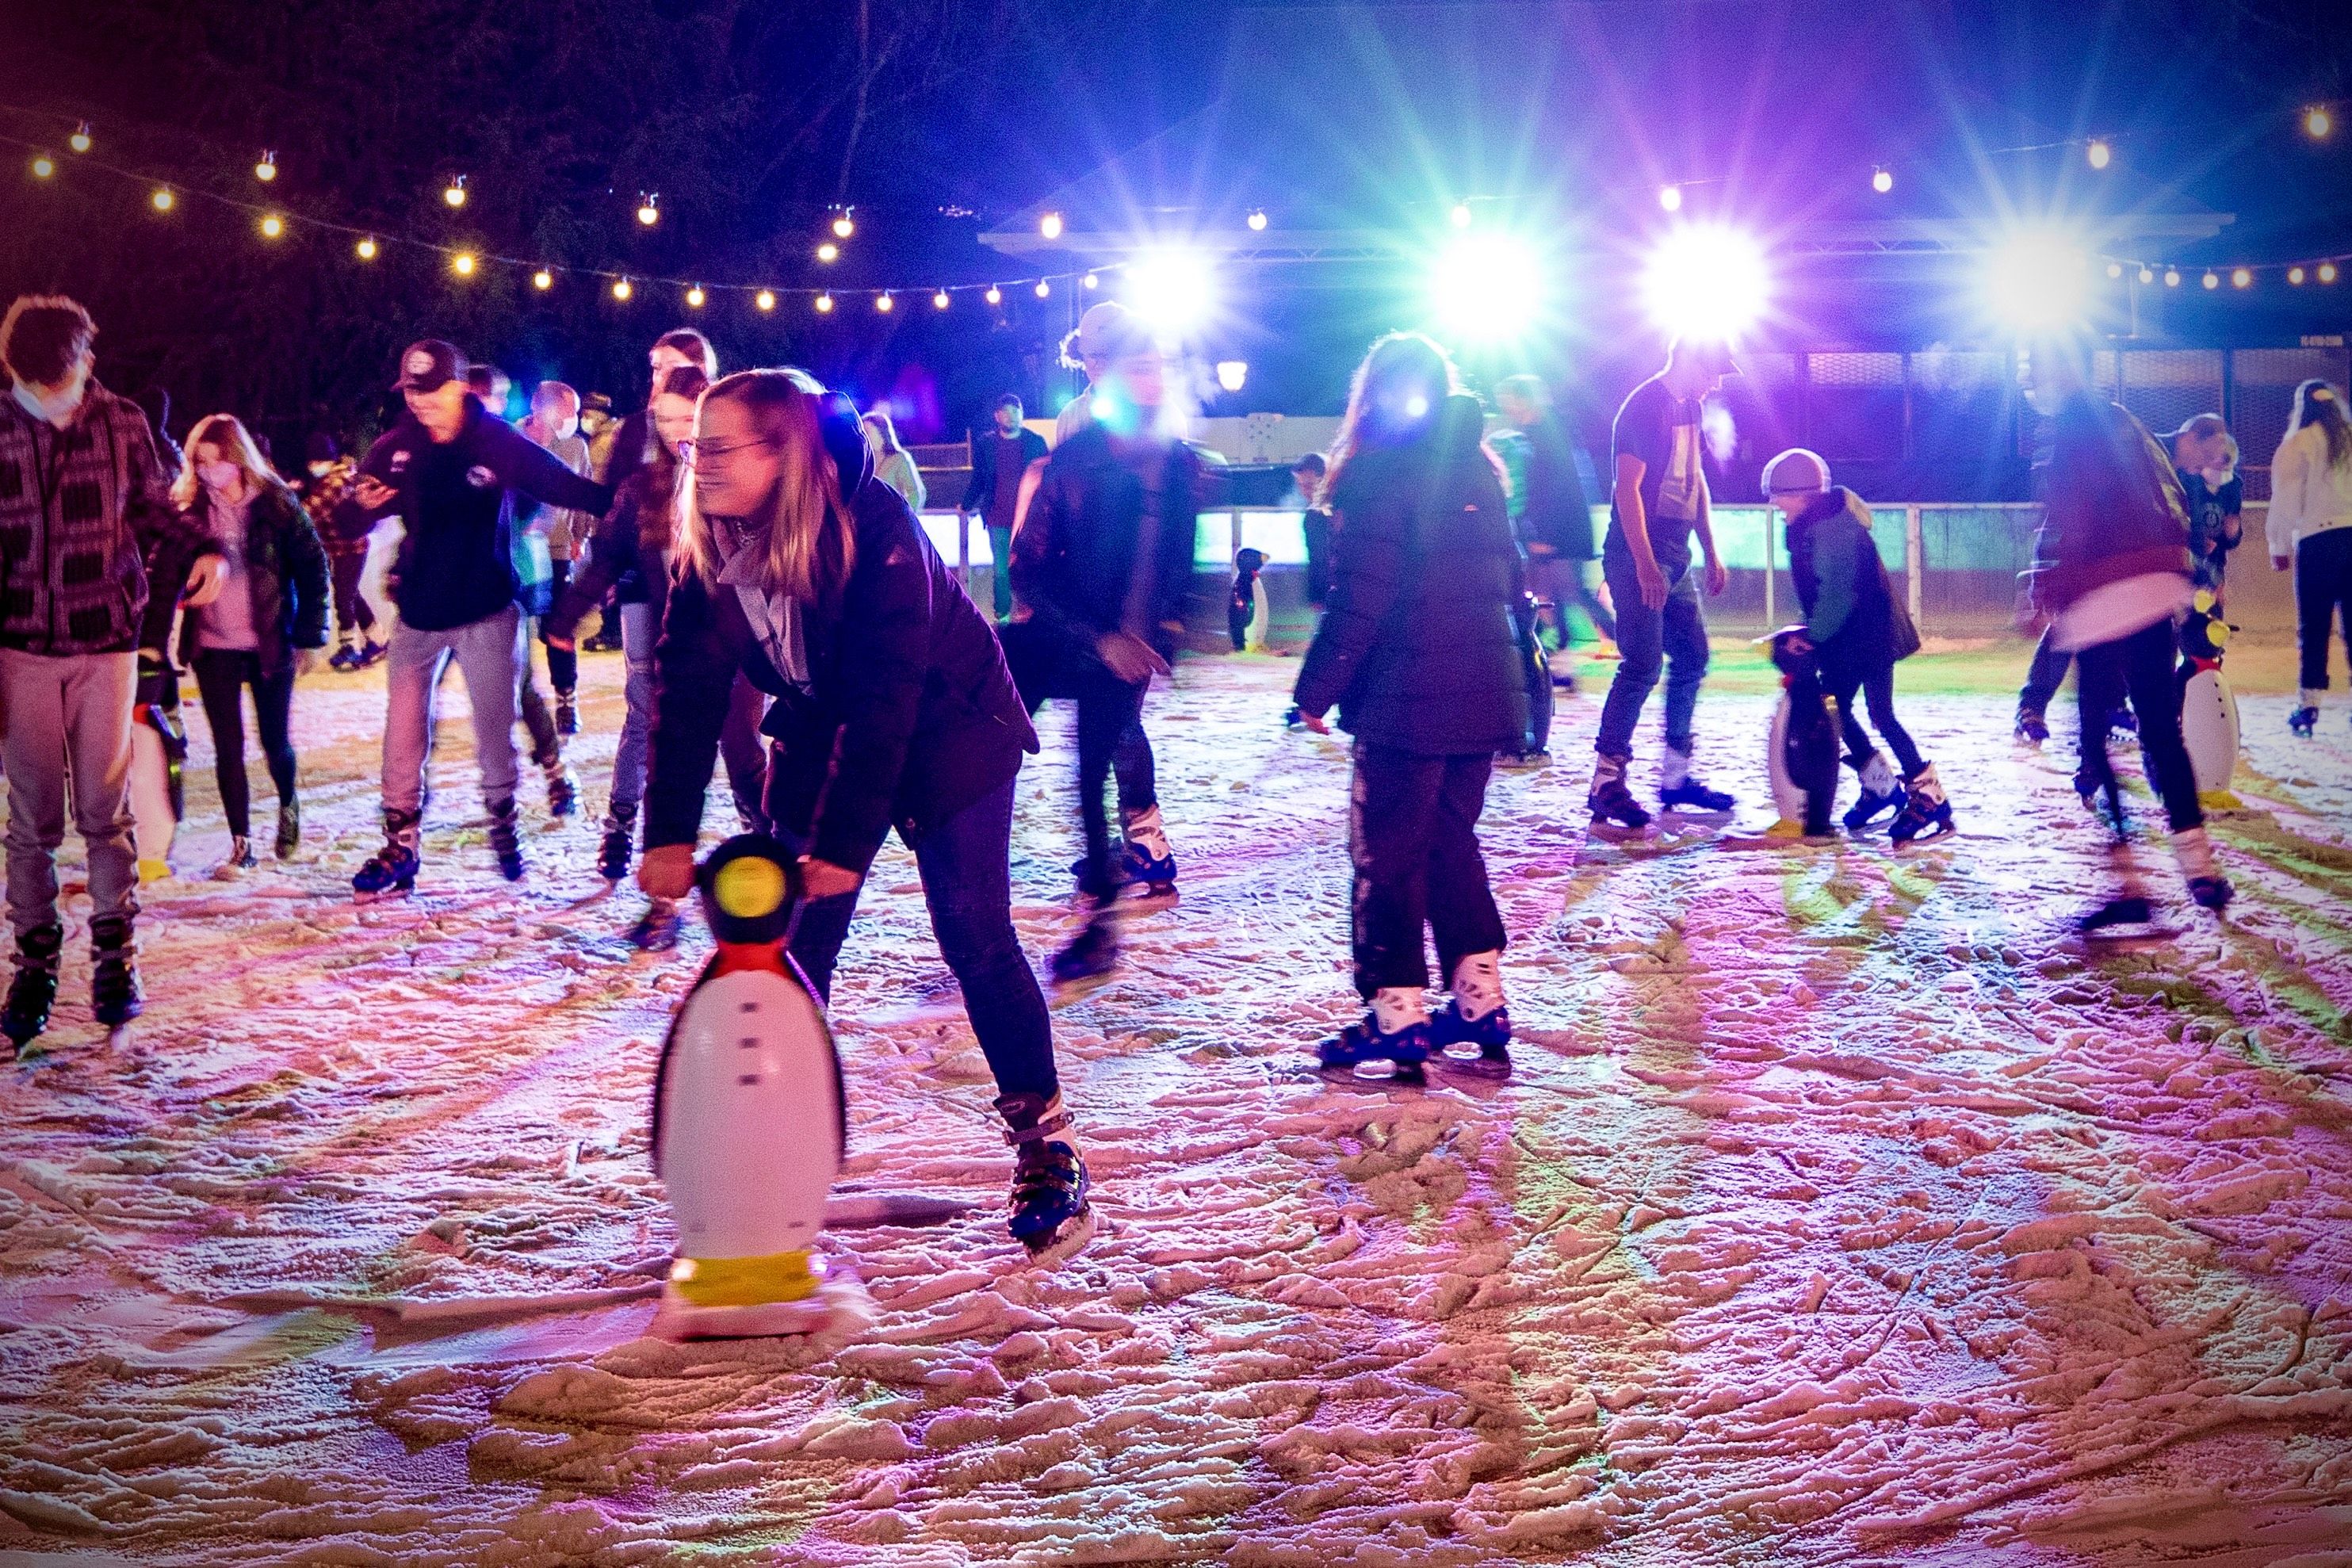 outdoor ice skating rink